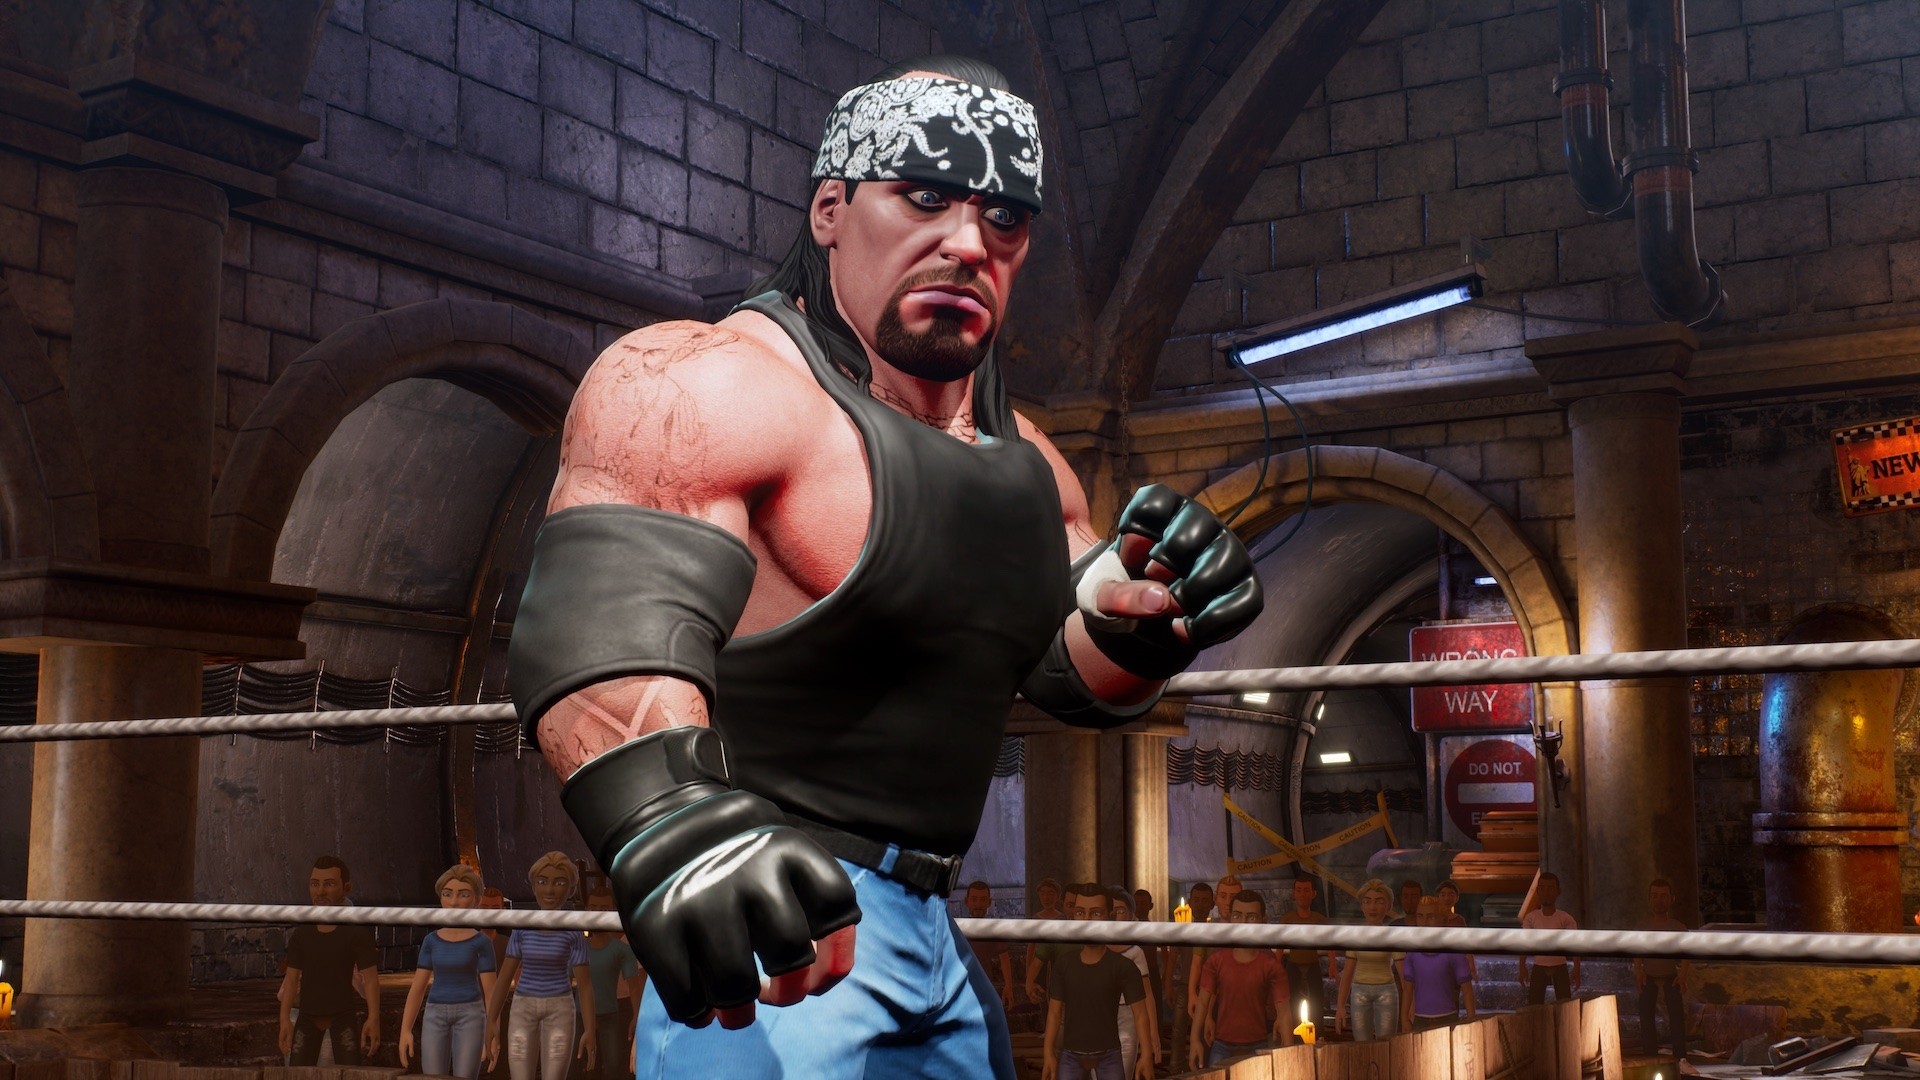 The Undertaker is Now Available in WWE 2K Battlegrounds